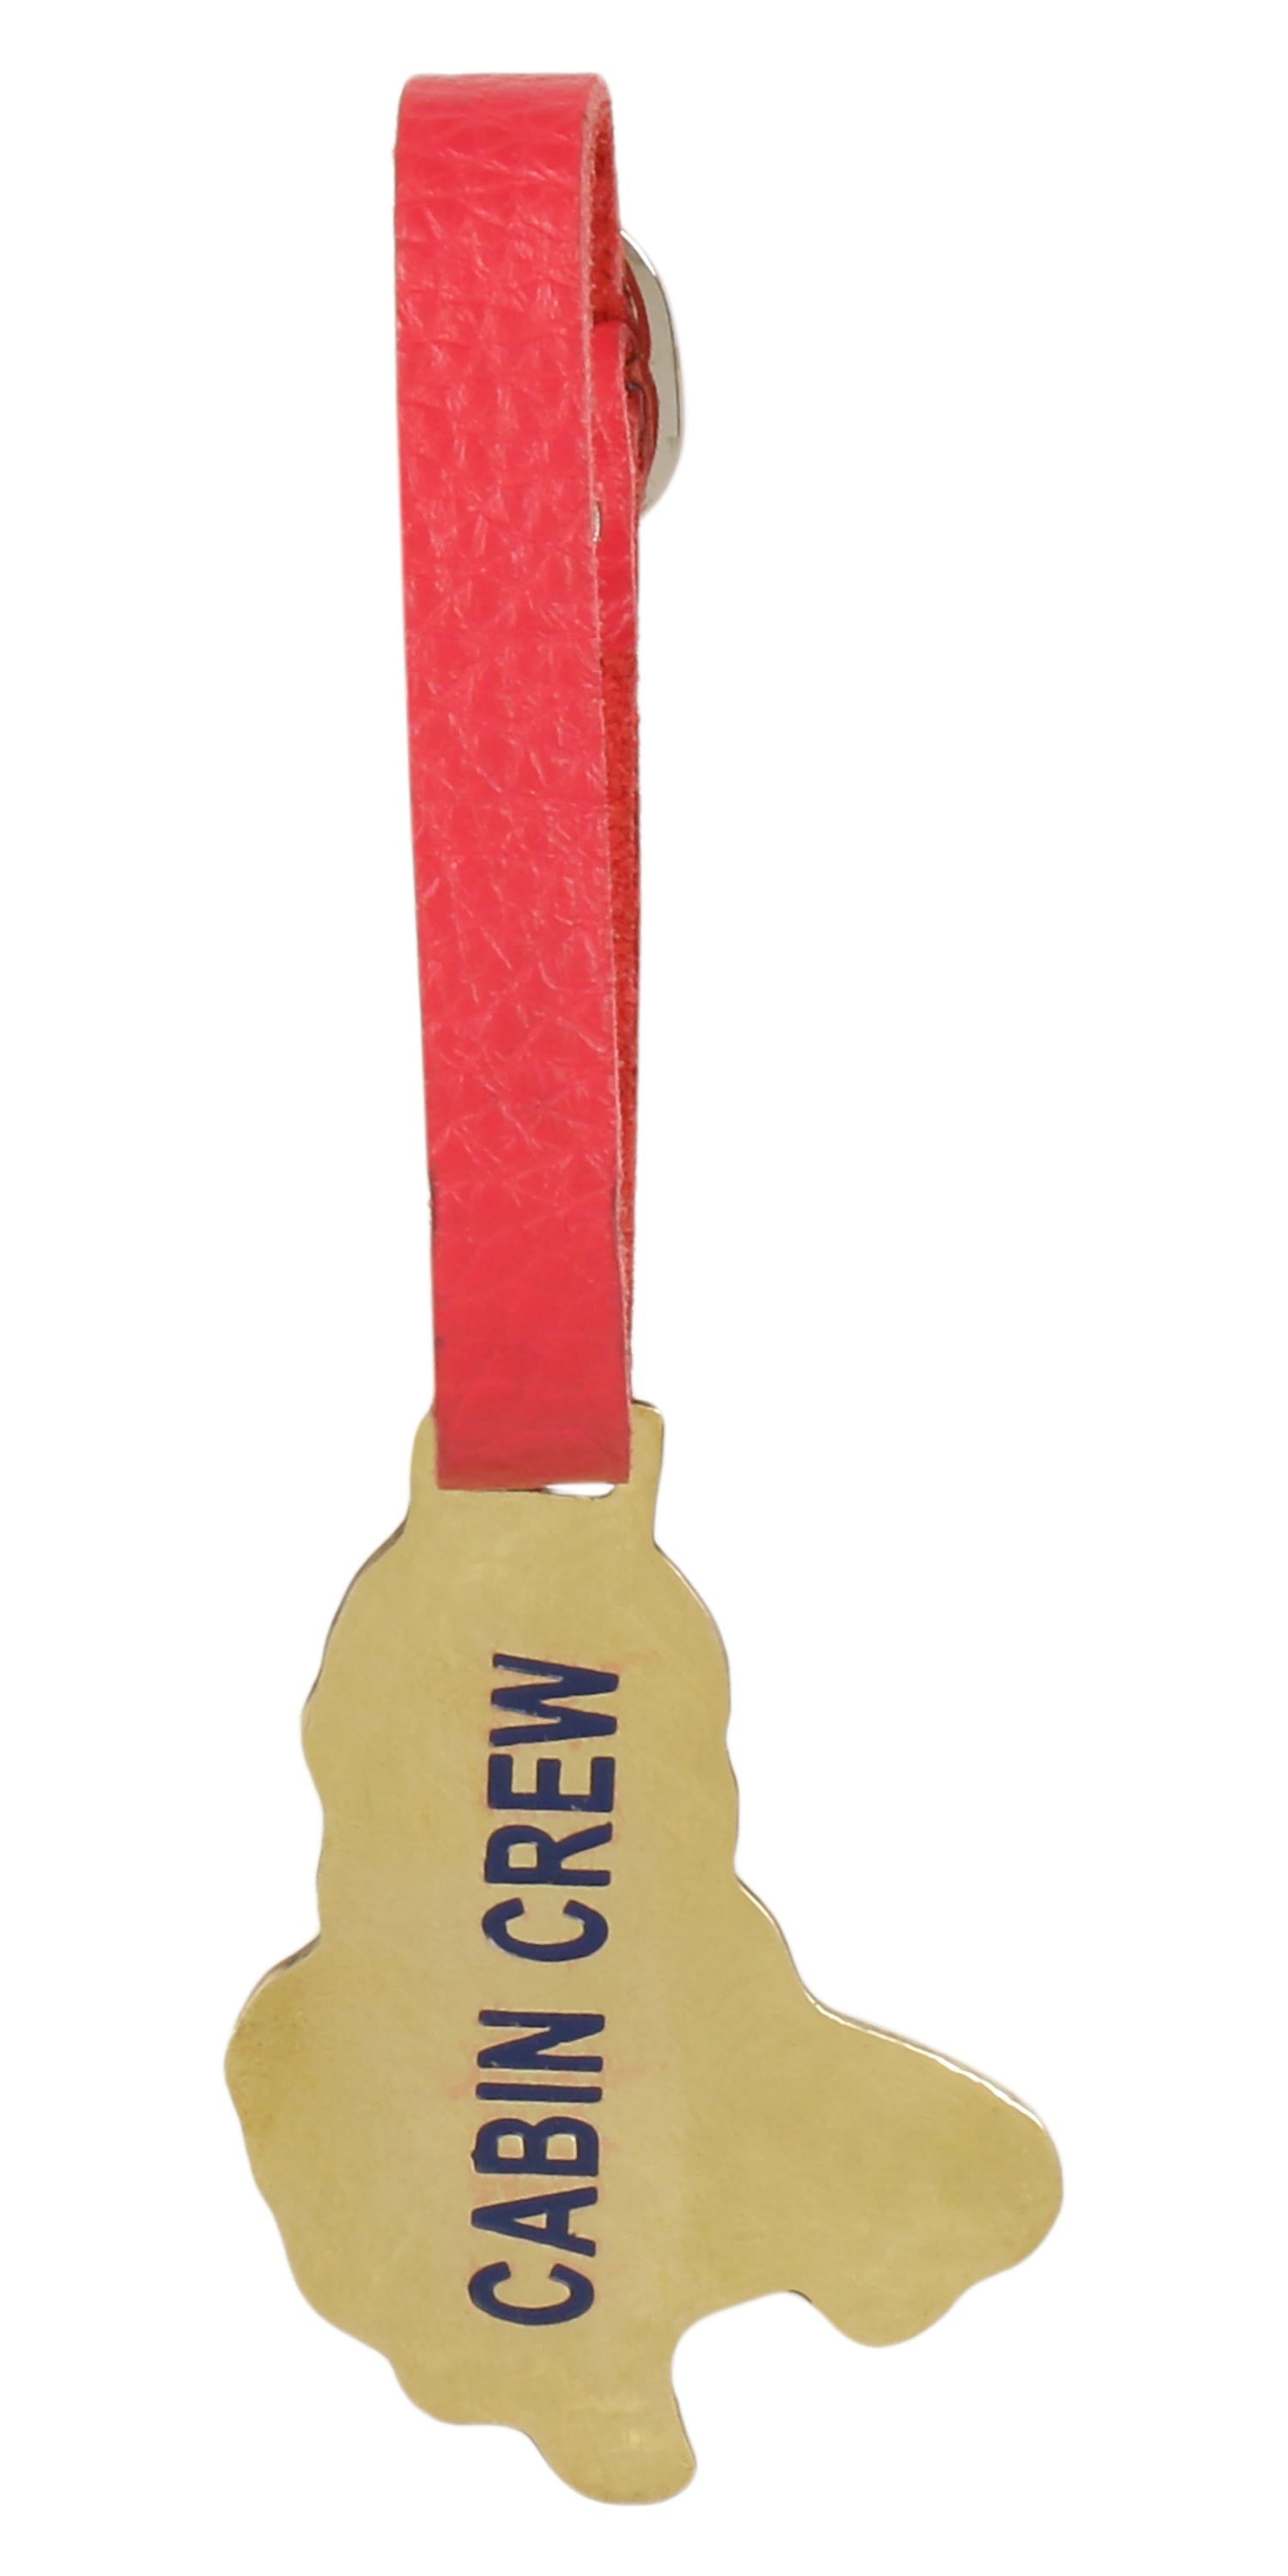 Cute Flight Attendant Brass Tag with red latch